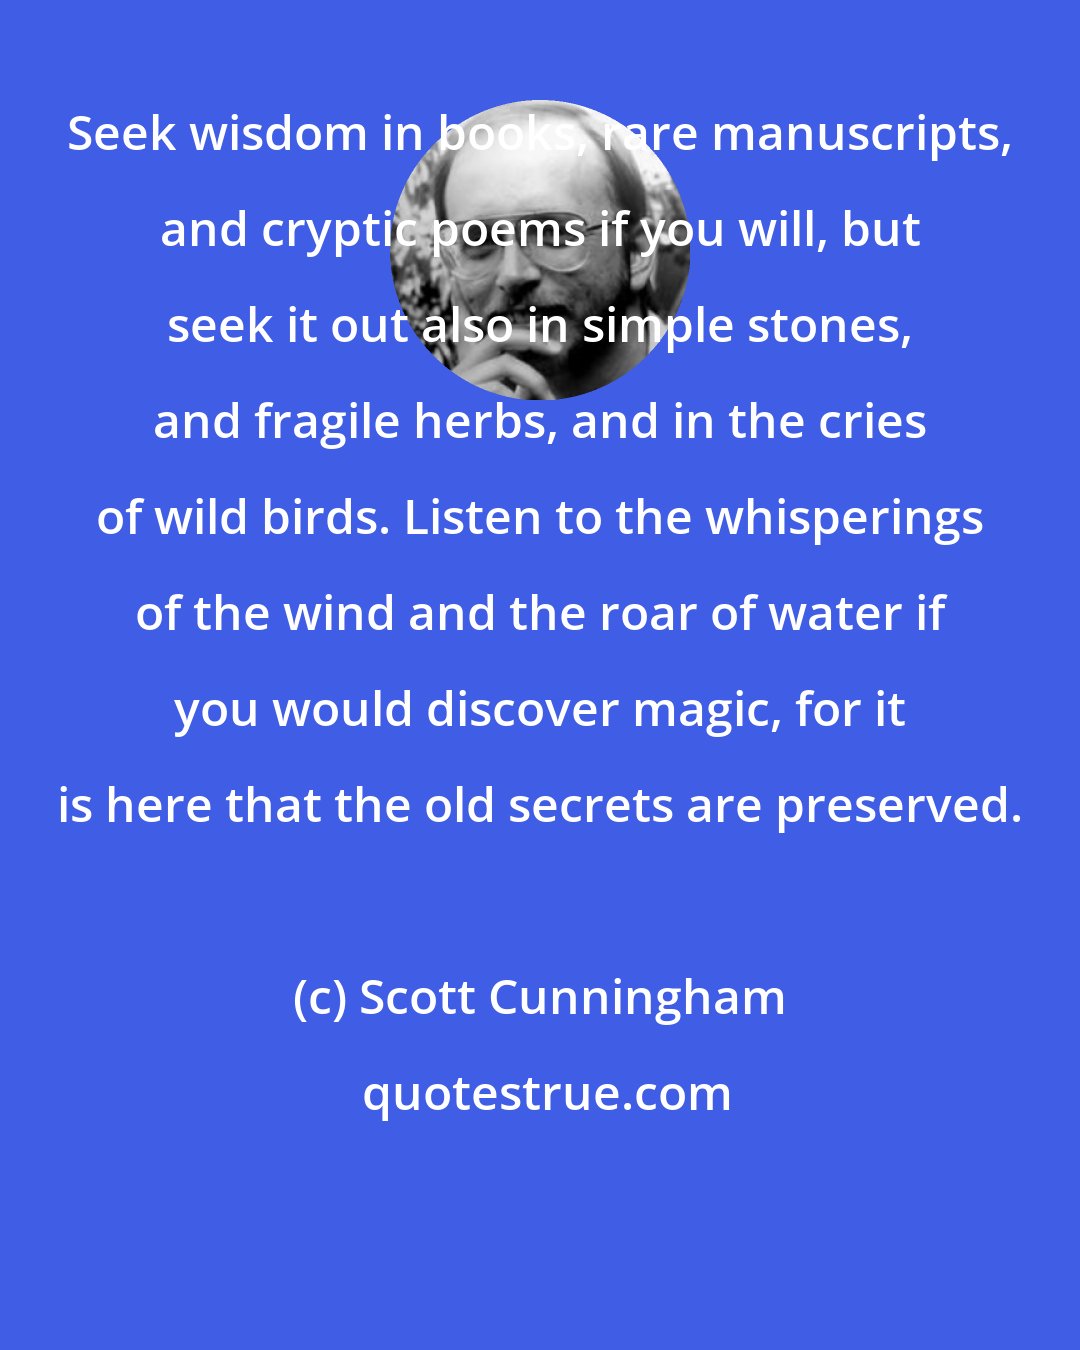 Scott Cunningham: Seek wisdom in books, rare manuscripts, and cryptic poems if you will, but seek it out also in simple stones, and fragile herbs, and in the cries of wild birds. Listen to the whisperings of the wind and the roar of water if you would discover magic, for it is here that the old secrets are preserved.